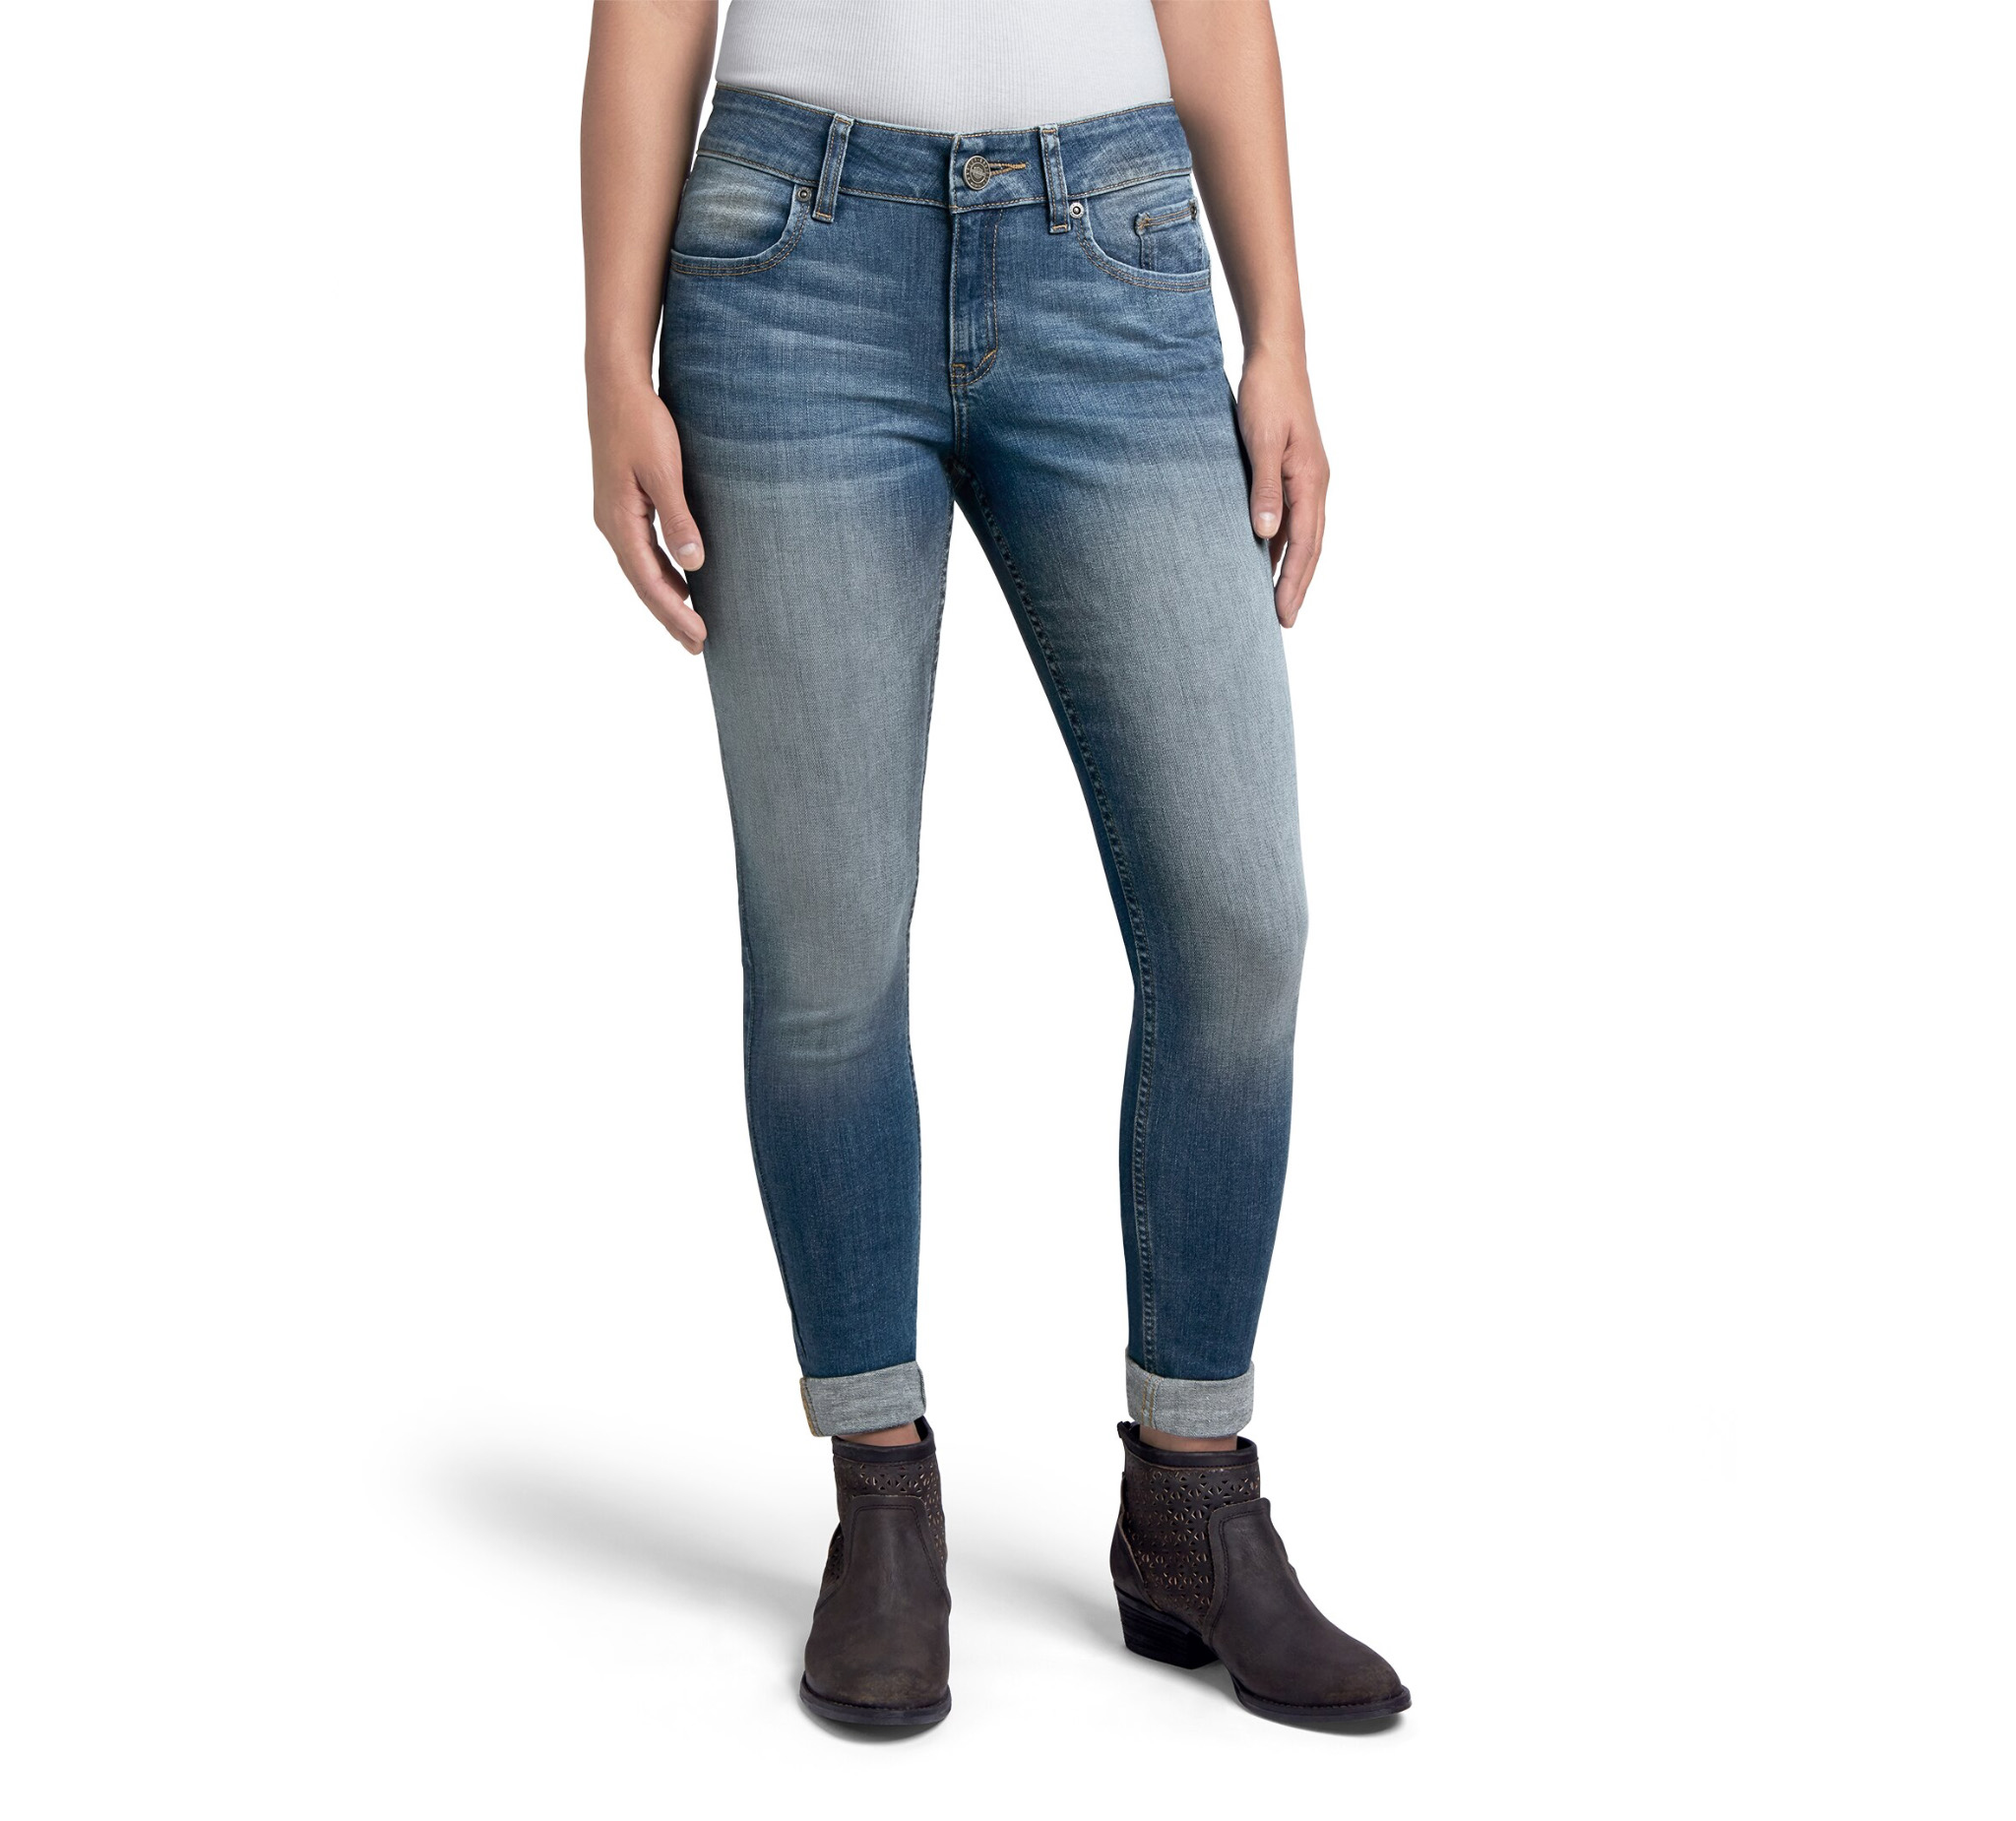 Women's Skinny Mid-Rise Jeans - Tall | Harley-Davidson USA